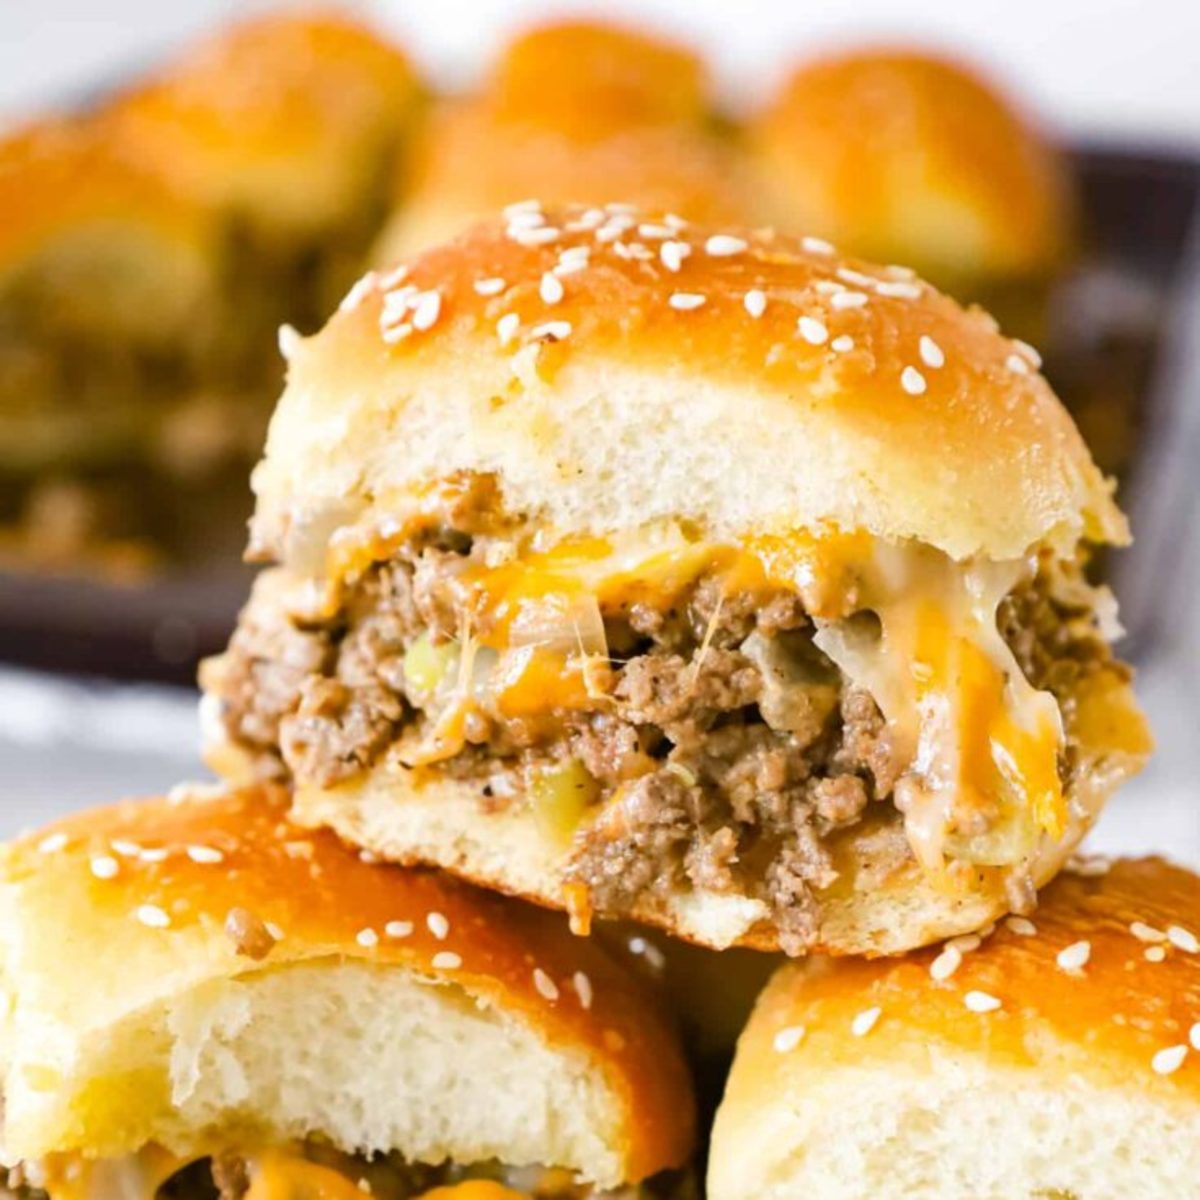 I am telling you these ground turkey sliders are juicy, cheesy and bursting with flavor, it was everything my family love in a great slider and most of all they are super healthy These turkey sliders are really quick and easy to put together. ..